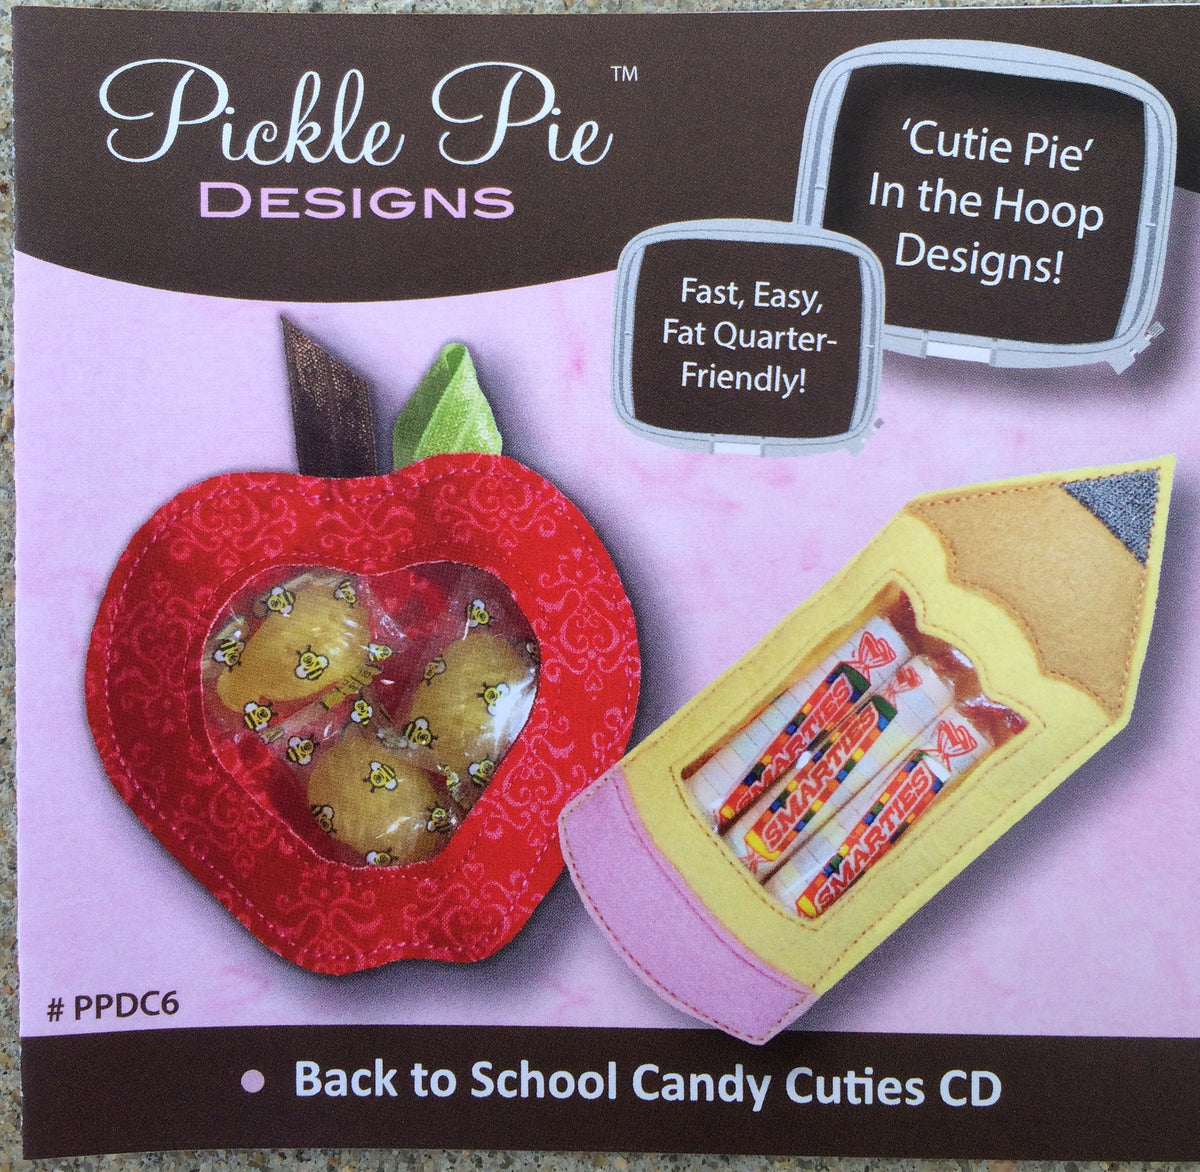 Back to School Candy Cuties CD